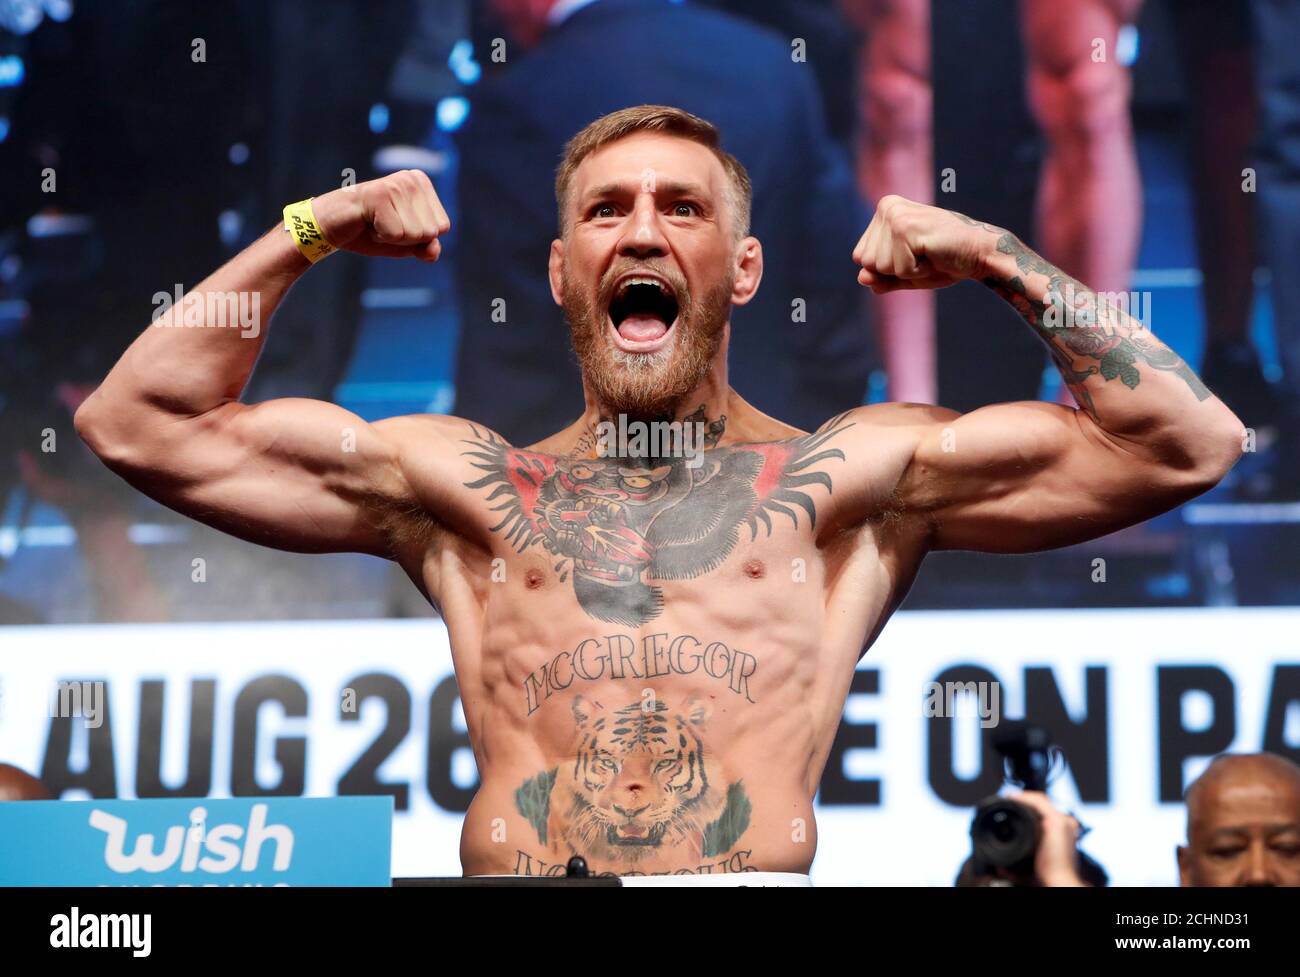 UFC lightweight champion Conor McGregor of Ireland poses on the scale  during their official weigh-in at T-Mobile Arena in Las Vegas, Nevada, U.S.  on August 25, 2017. REUTERS/Steve Marcus Stock Photo -